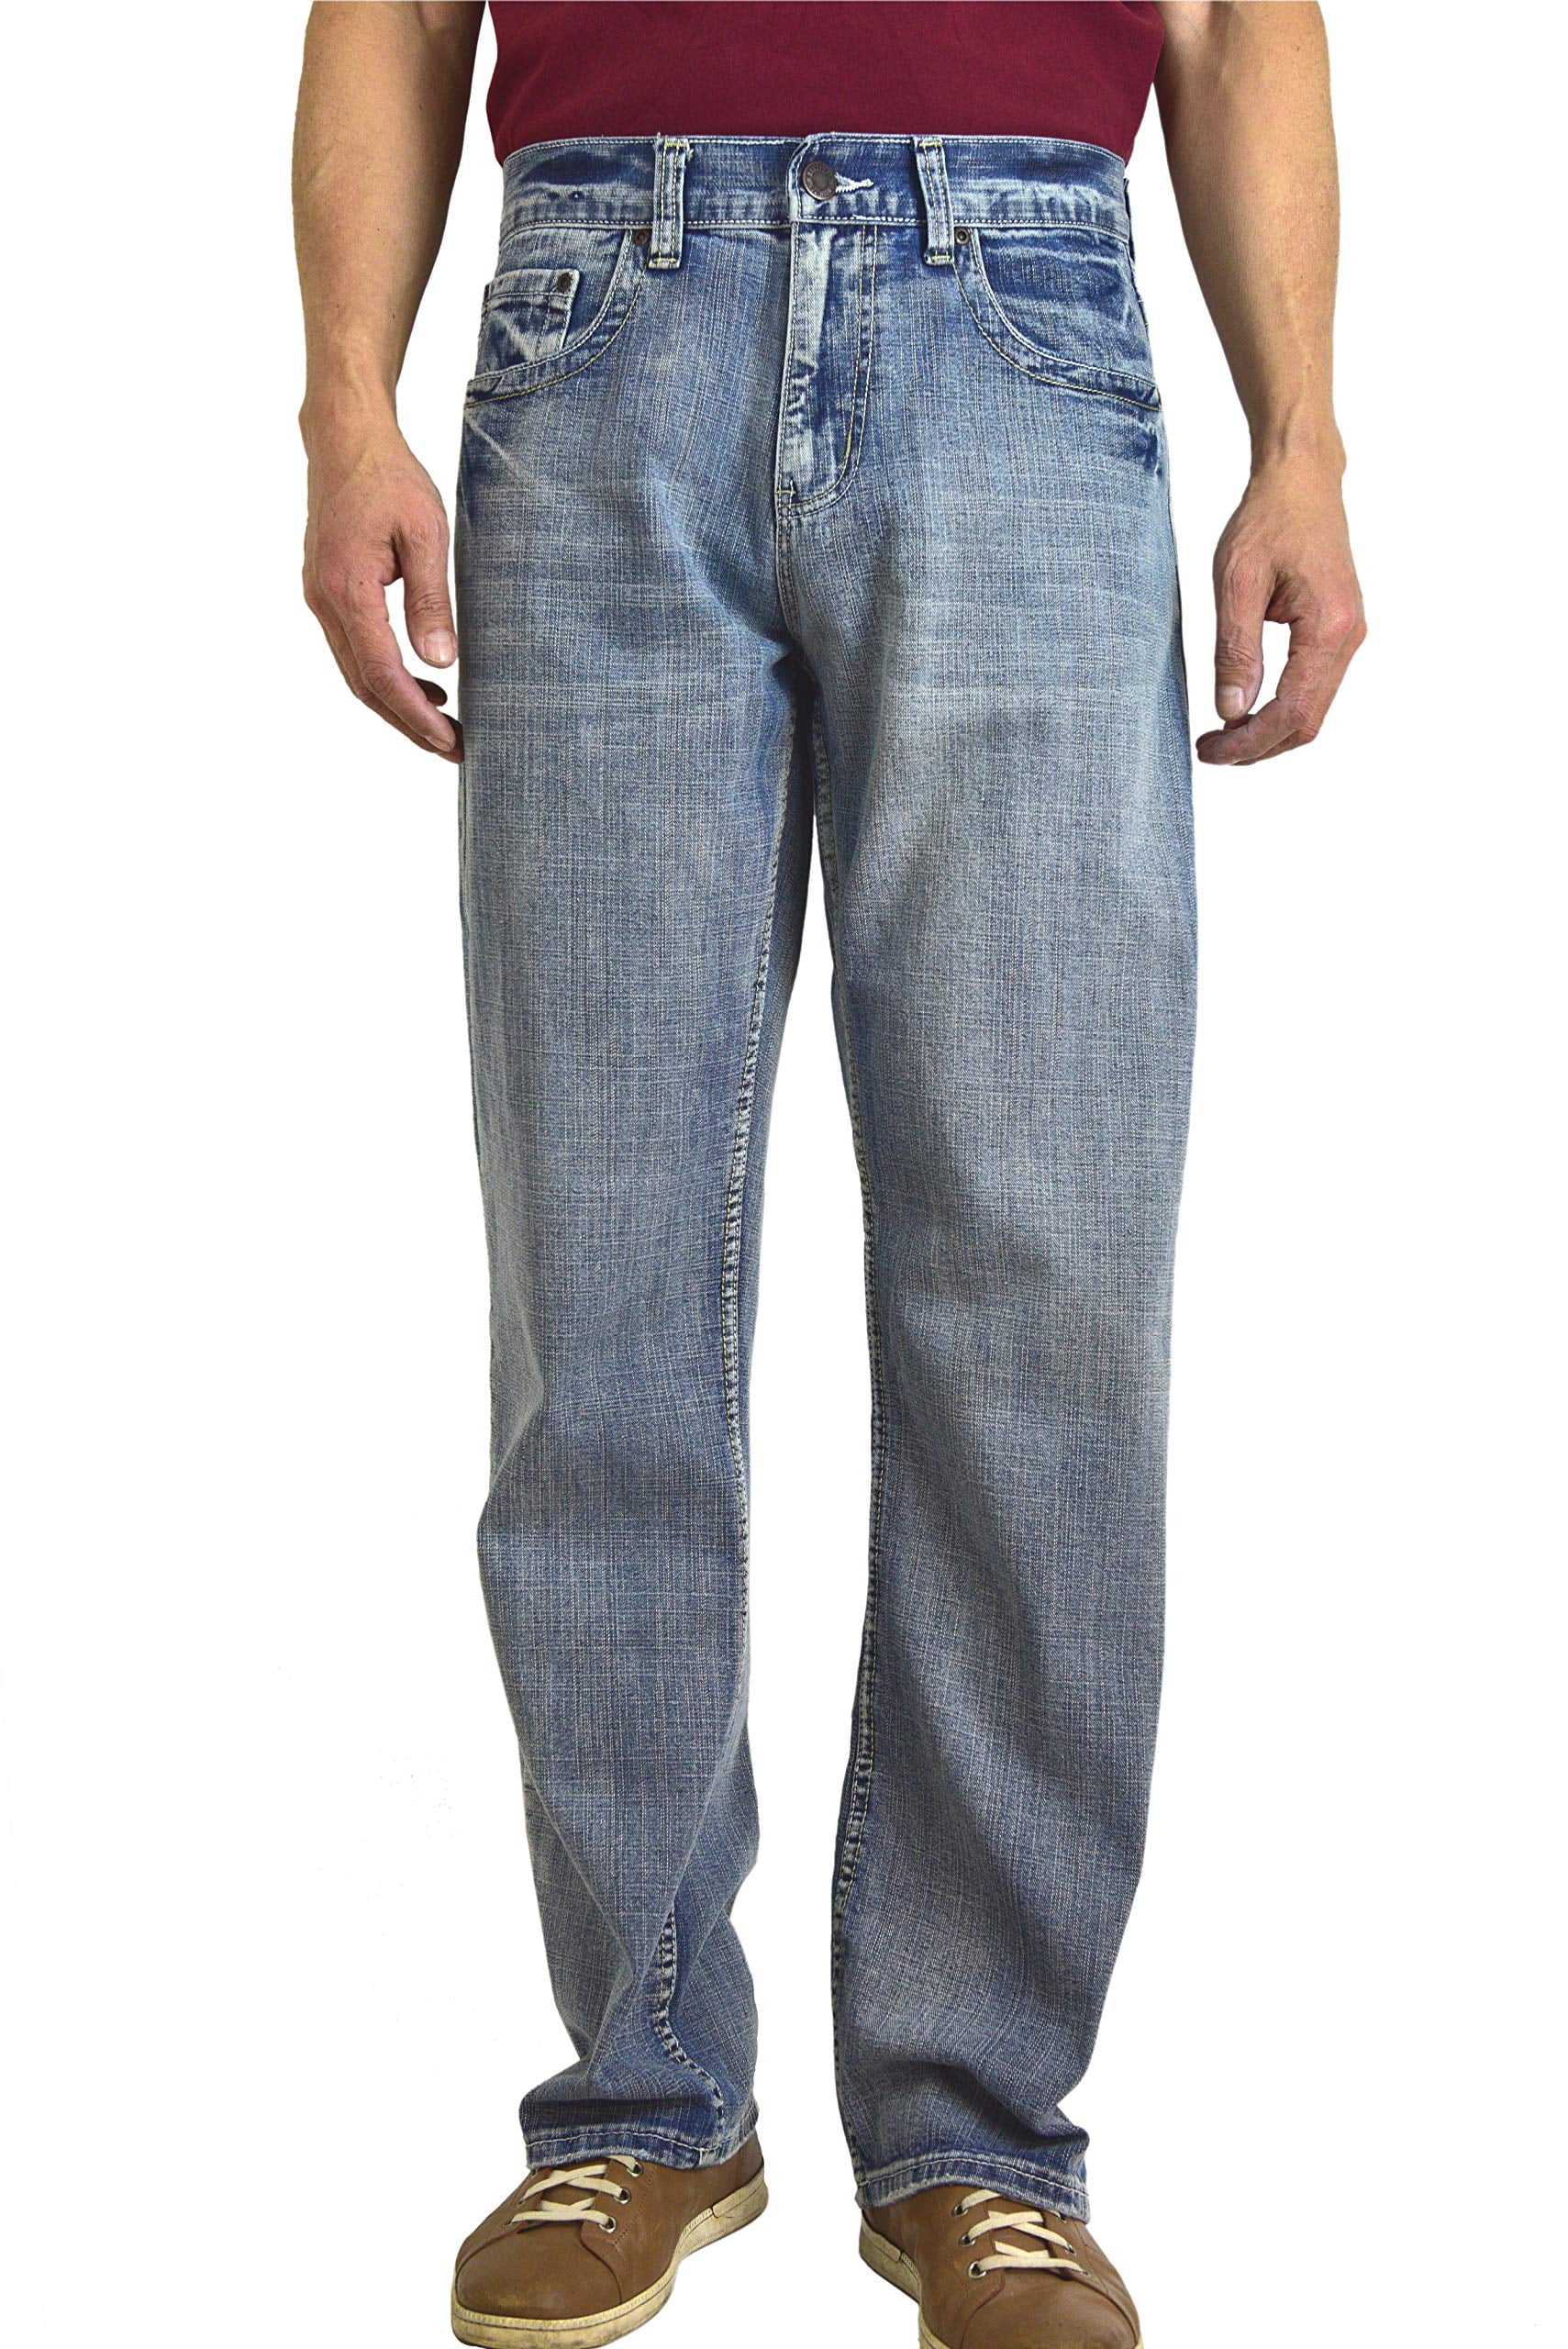 Bailey's Point Men's Fashion Relaxed Bootcut Jeans Wash Size 38X34 - Walmart.com